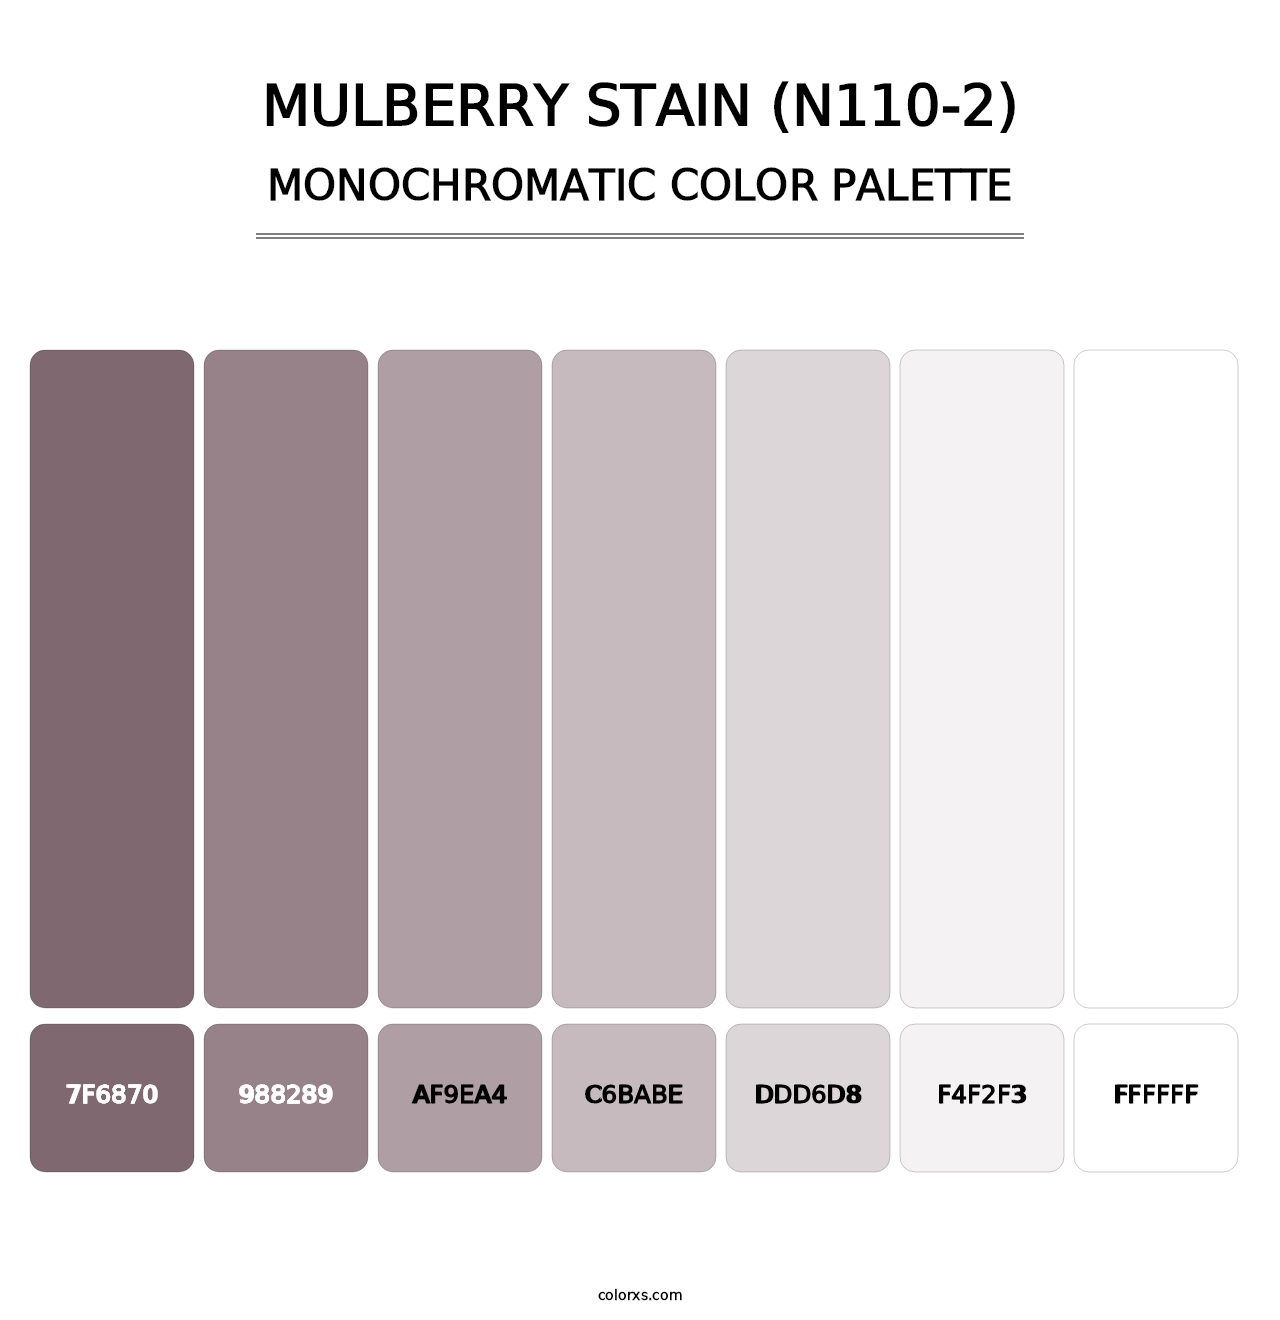 Mulberry Stain (N110-2) - Monochromatic Color Palette